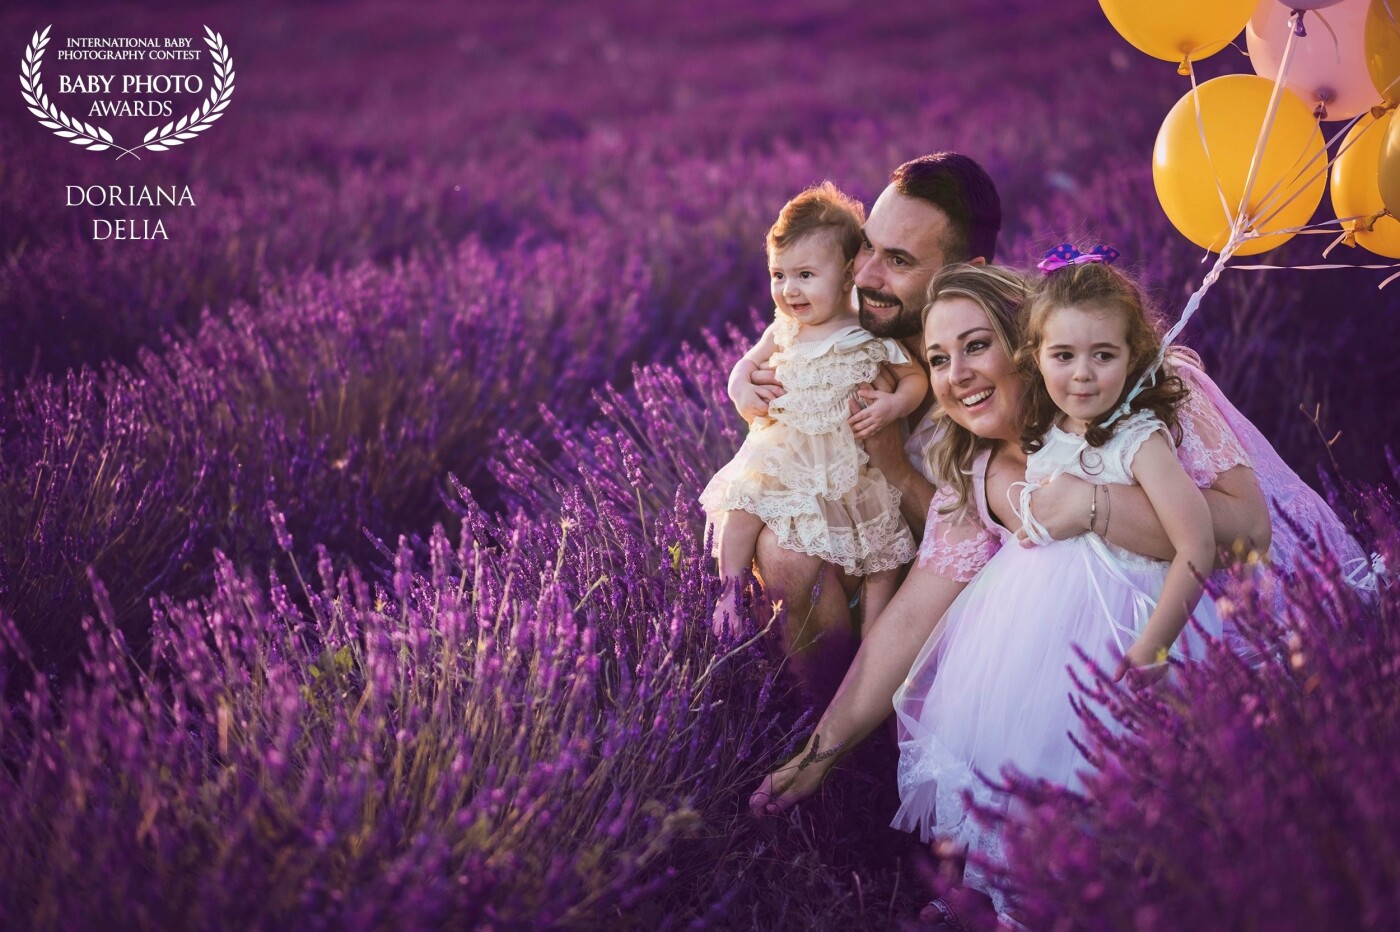 A splendid family photographed by me in the golden hour of sunset in the splendid location "Podere dell' arco country charme" in Viterbo among the lavender fields.